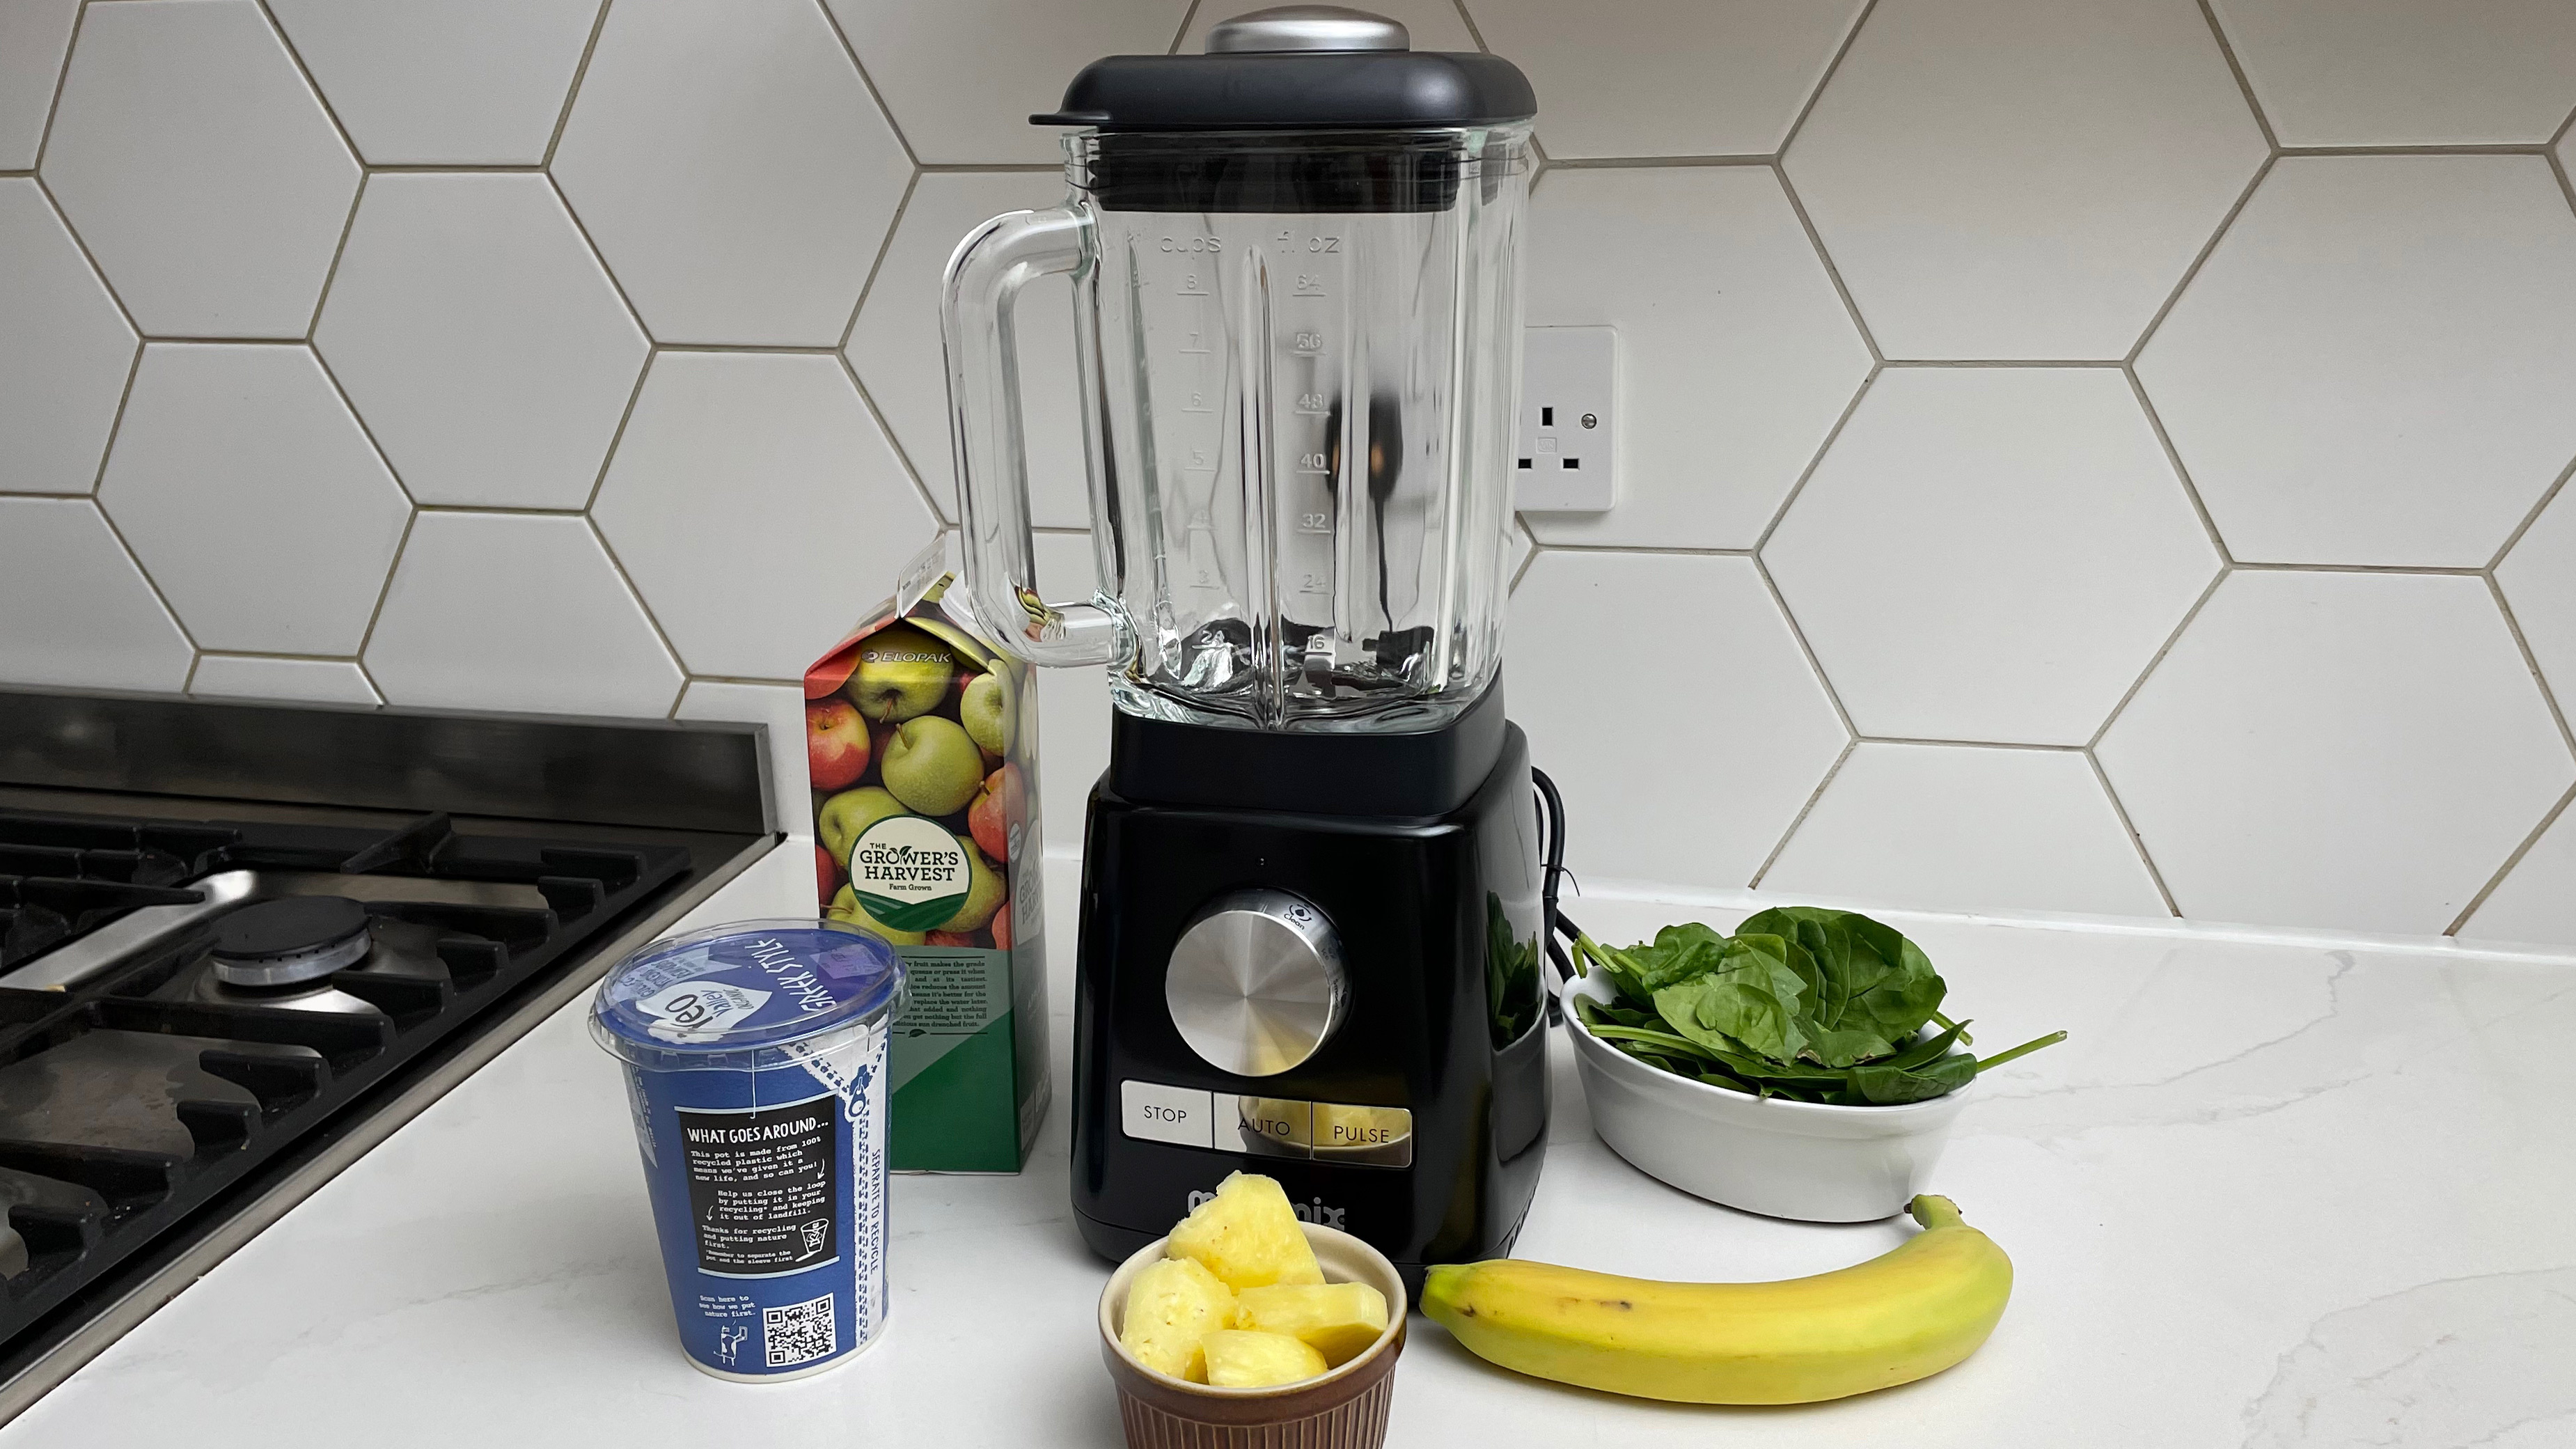 The Magimix Power Blender surrounded by ingredients to make a smoothie